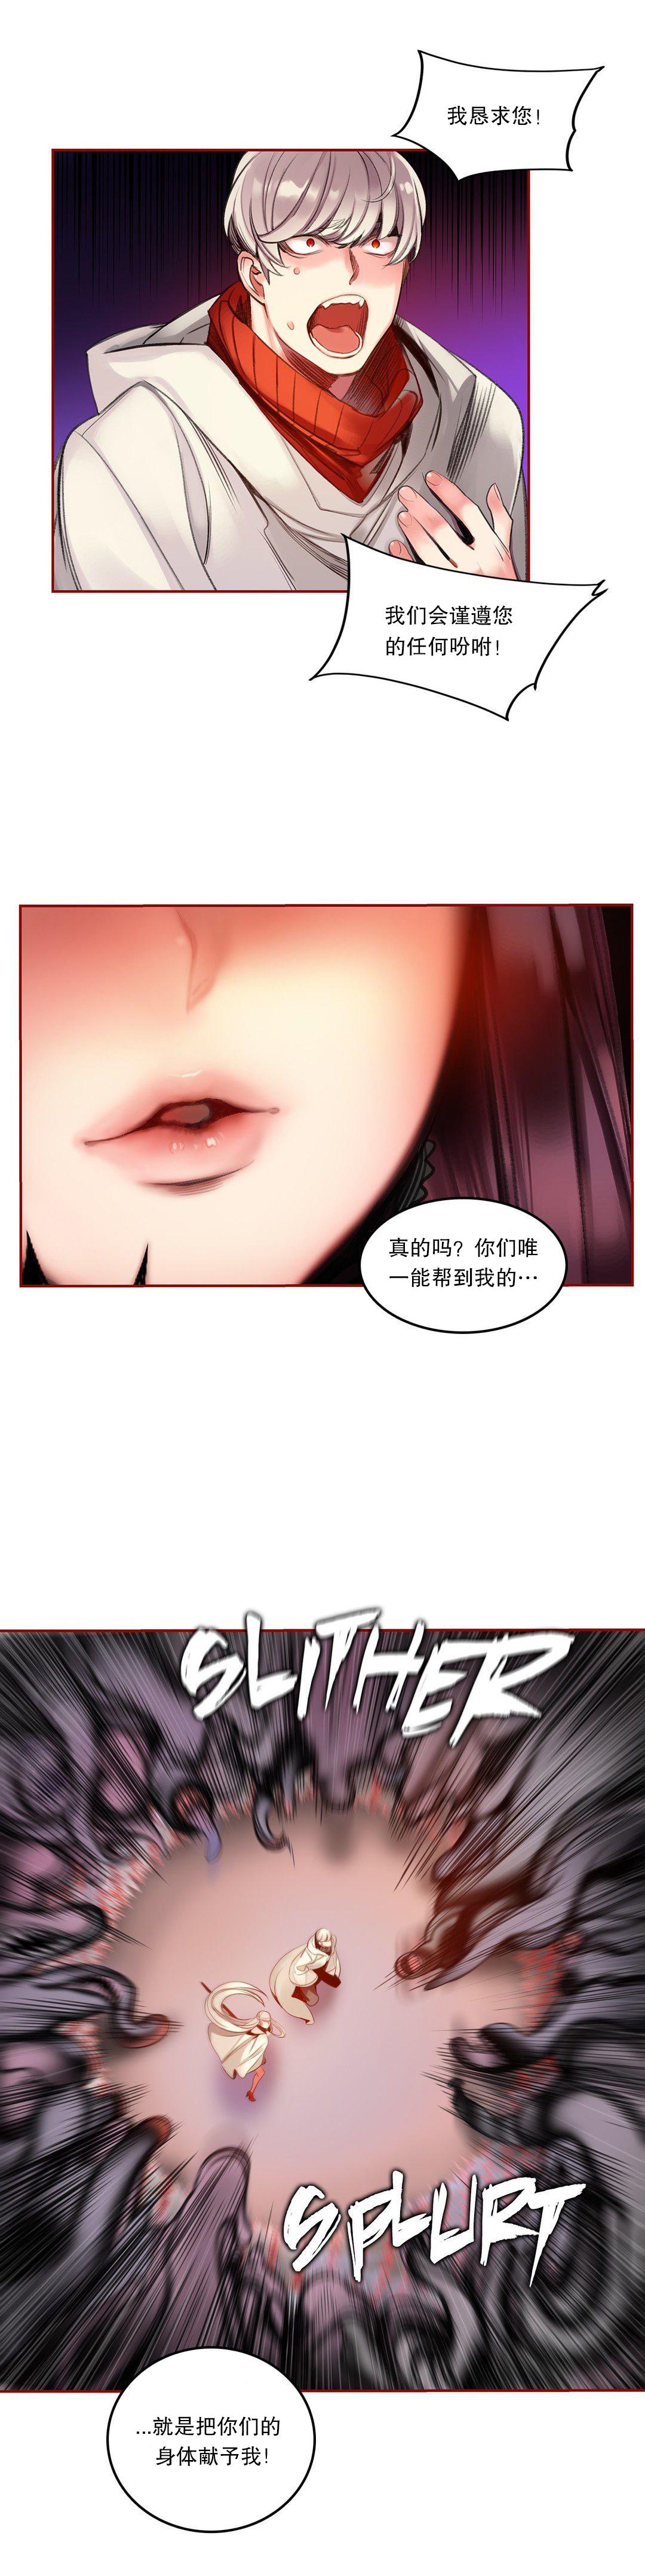 [Juder] Lilith`s Cord (第二季) Ch.61-63 [Chinese] [aaatwist个人汉化] [Ongoing] 86